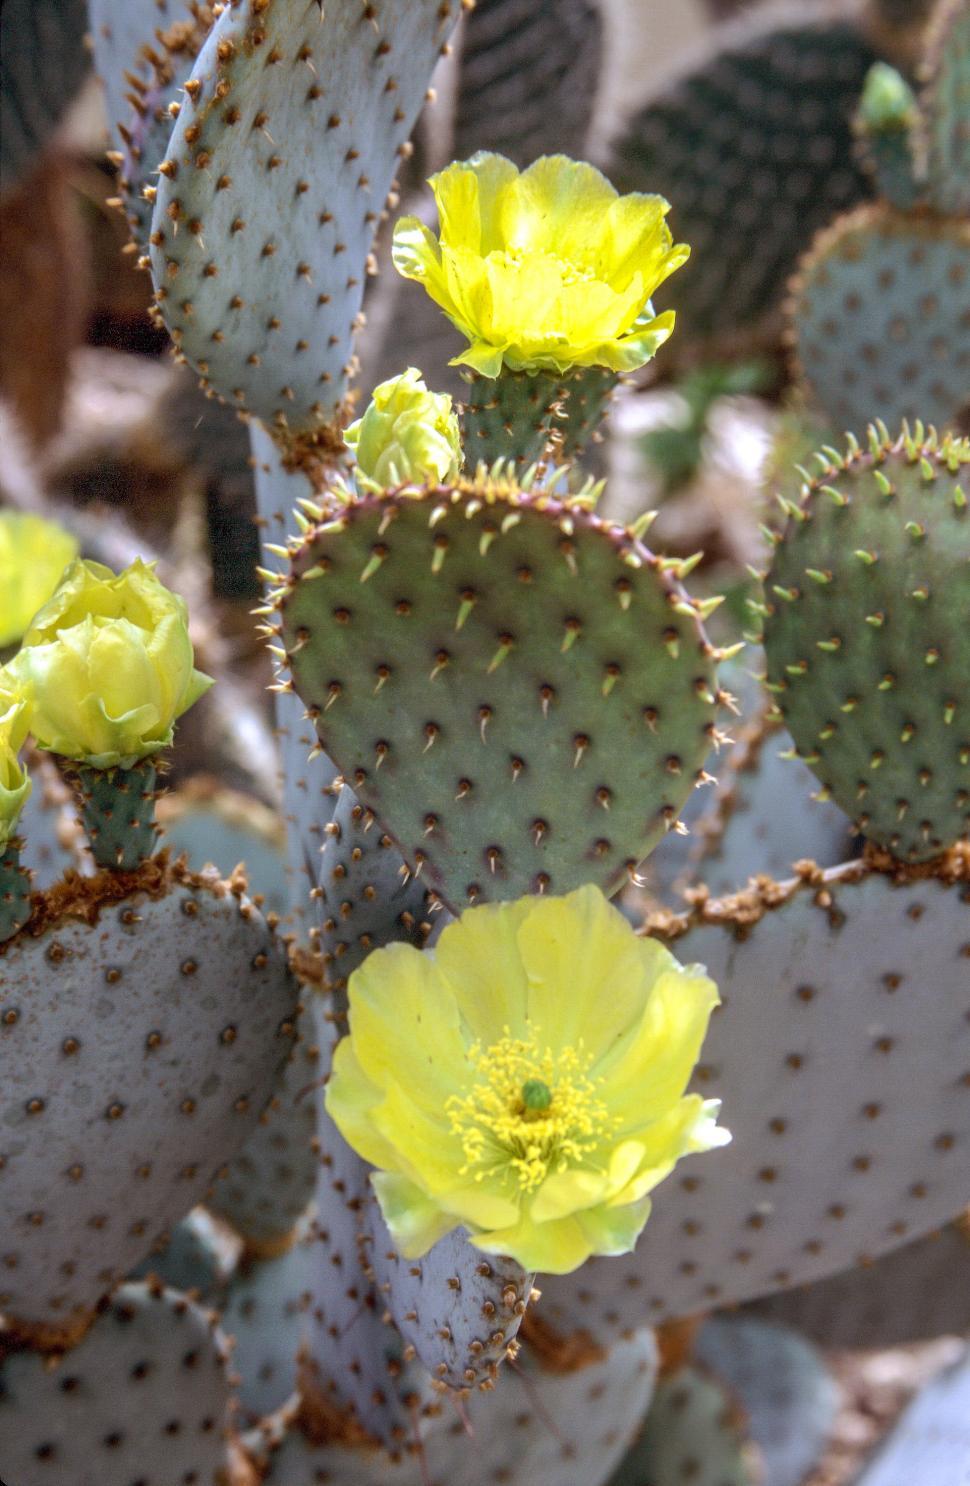 Free Image of Prickly Pear Cactus 